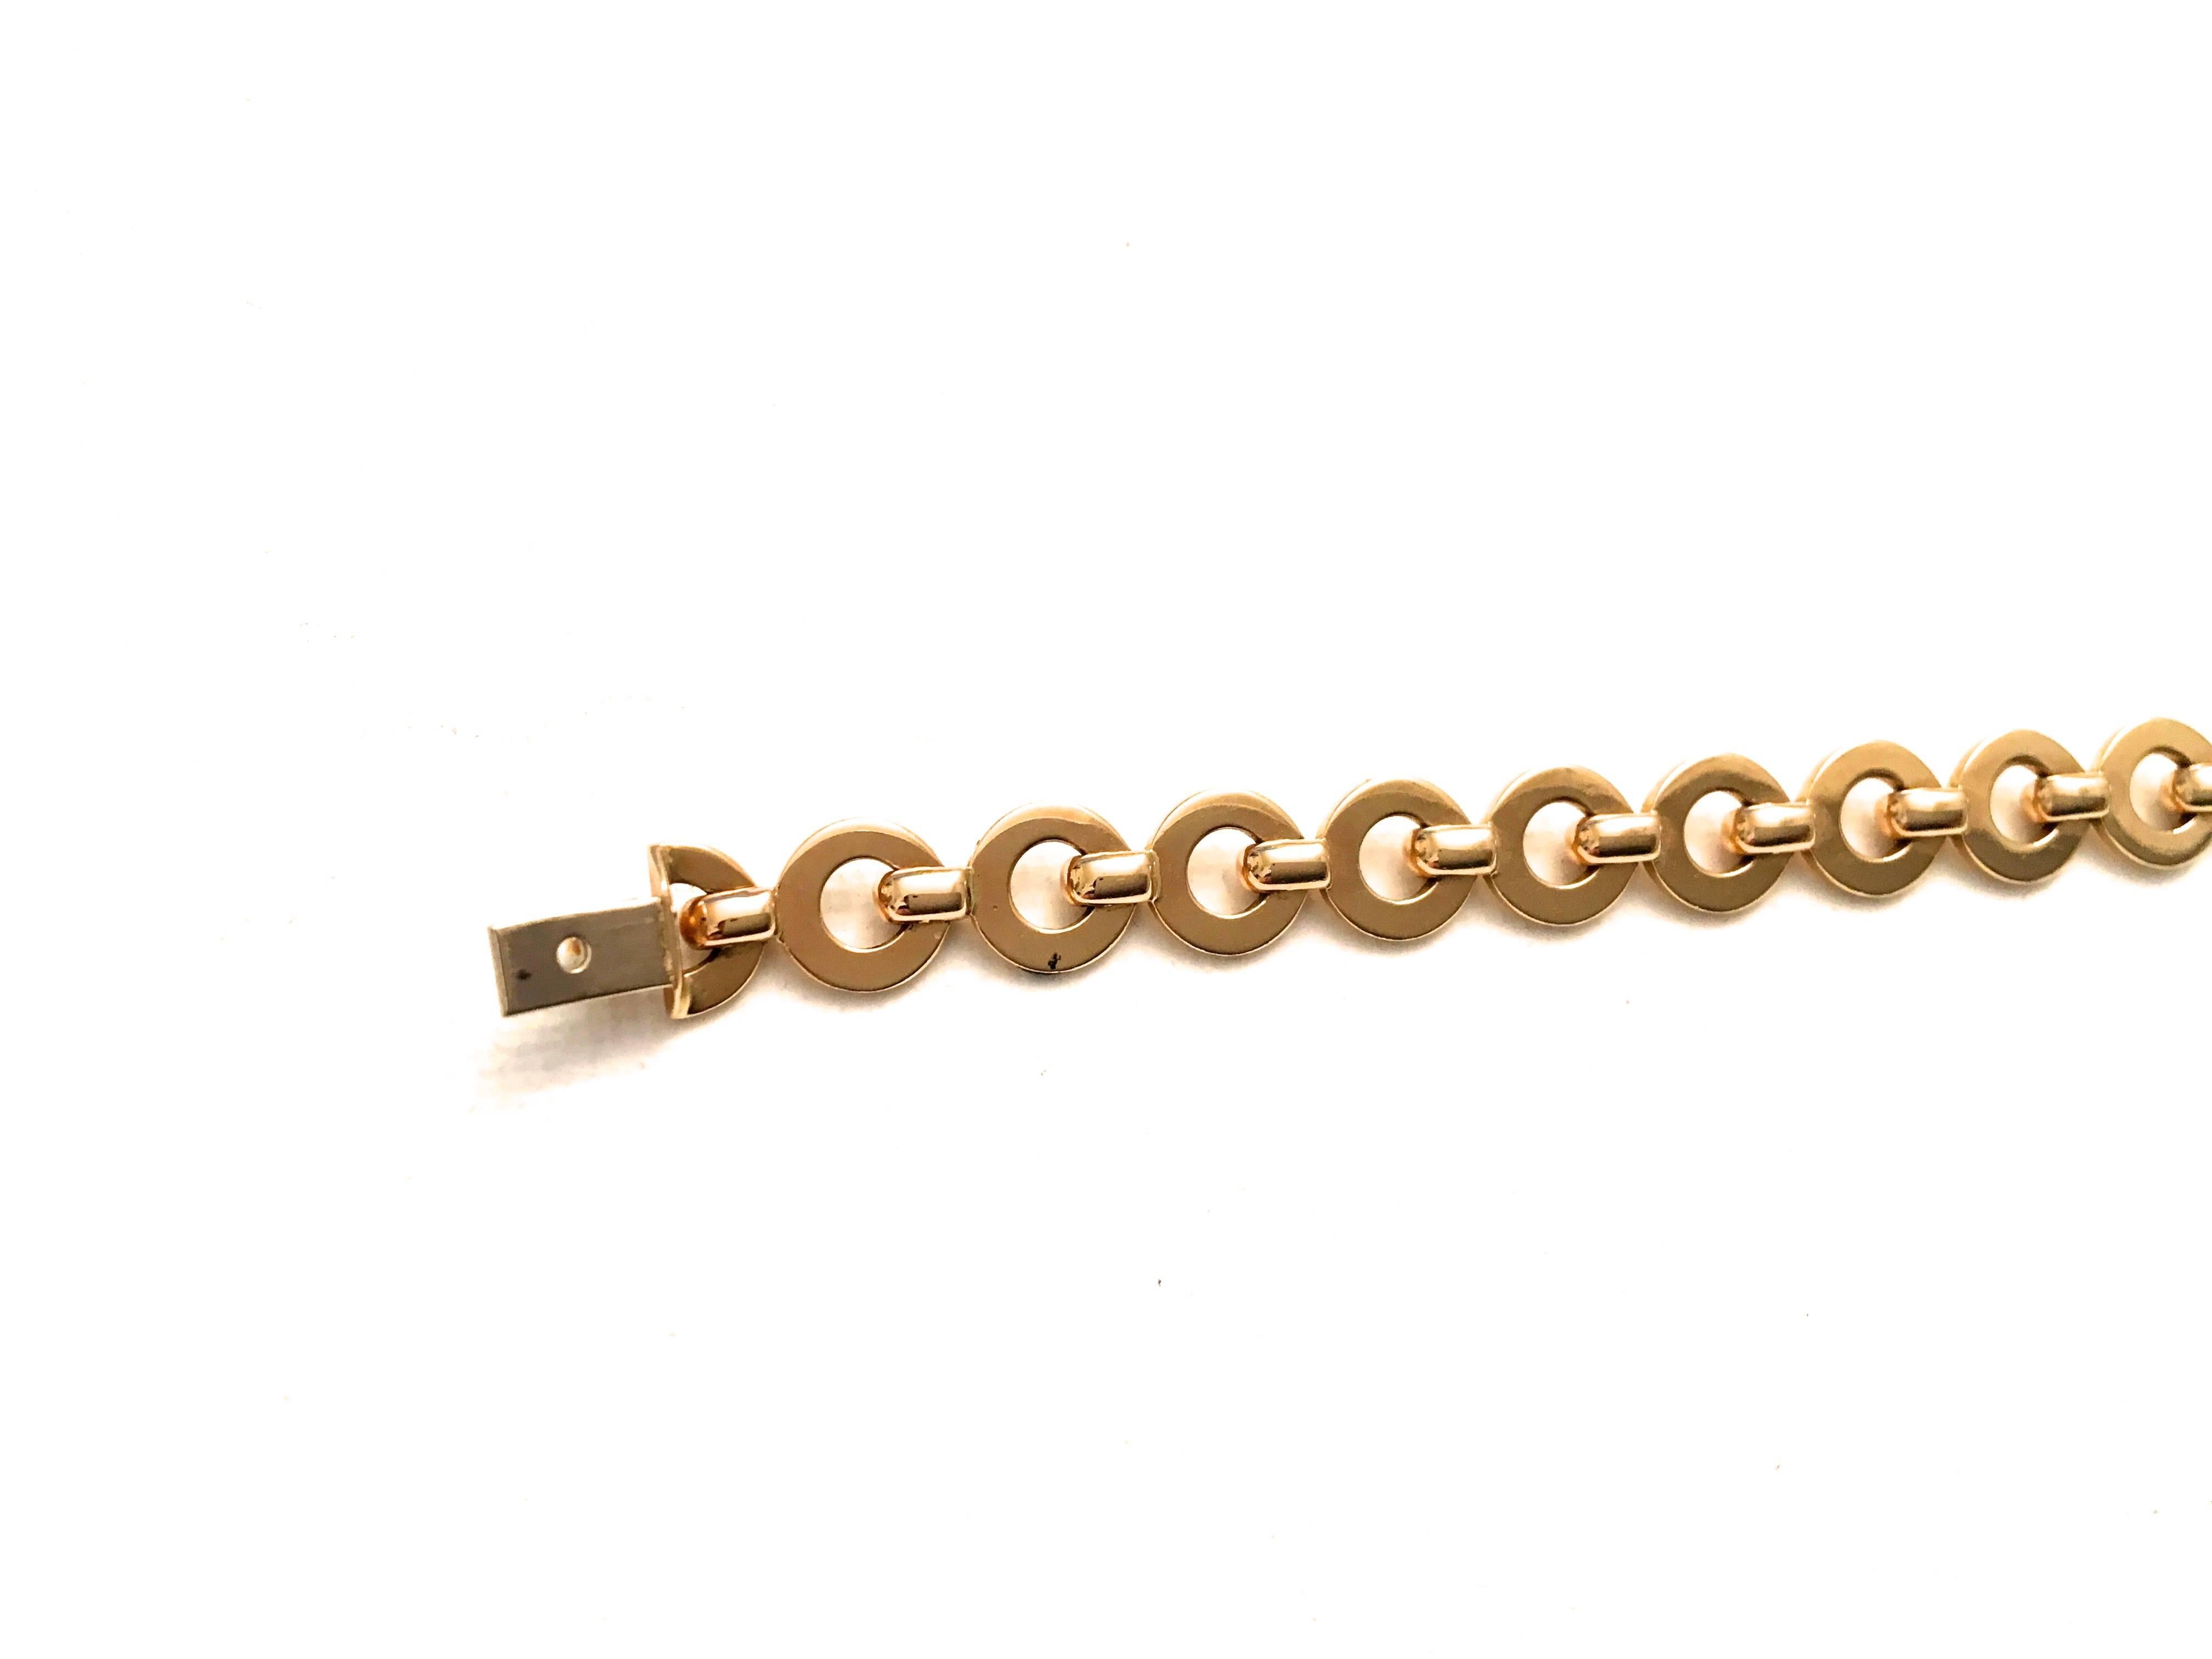 Presented here is a rare Chanel 18k gold chain bracelet. The bracelet is made entirely of 750 18k yellow gold. The links are the iconic Chanel 'C' that is prevalent throughout brand. The bracelet is from Chanel's fine jewelry line where it